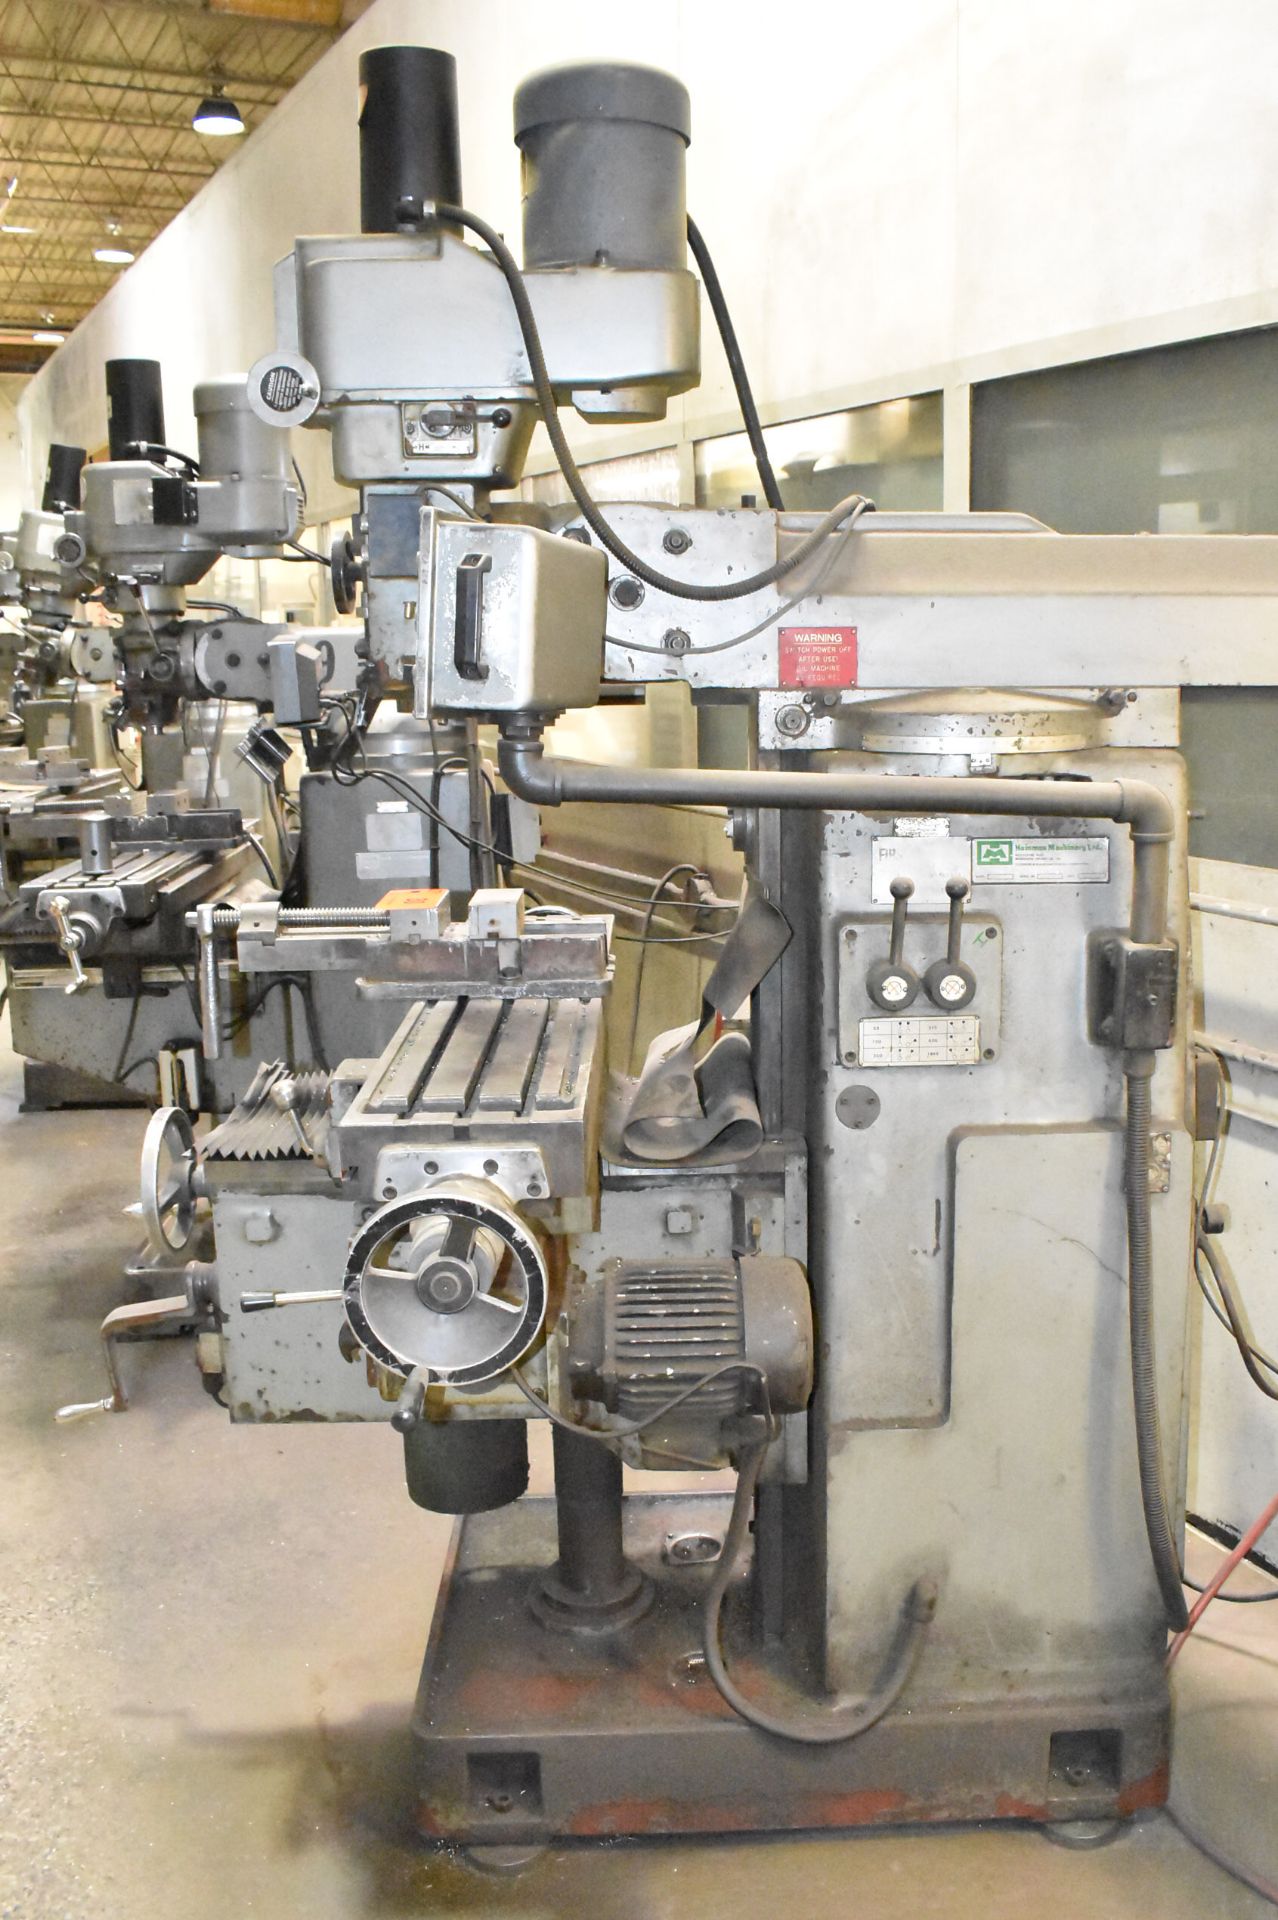 FIRST LC-20VHS UNIVERSAL MILLING MACHINE WITH 50"X10" TABLE, VERTICAL SPINDLE SPEEDS TO 4500 RPM, - Image 5 of 8